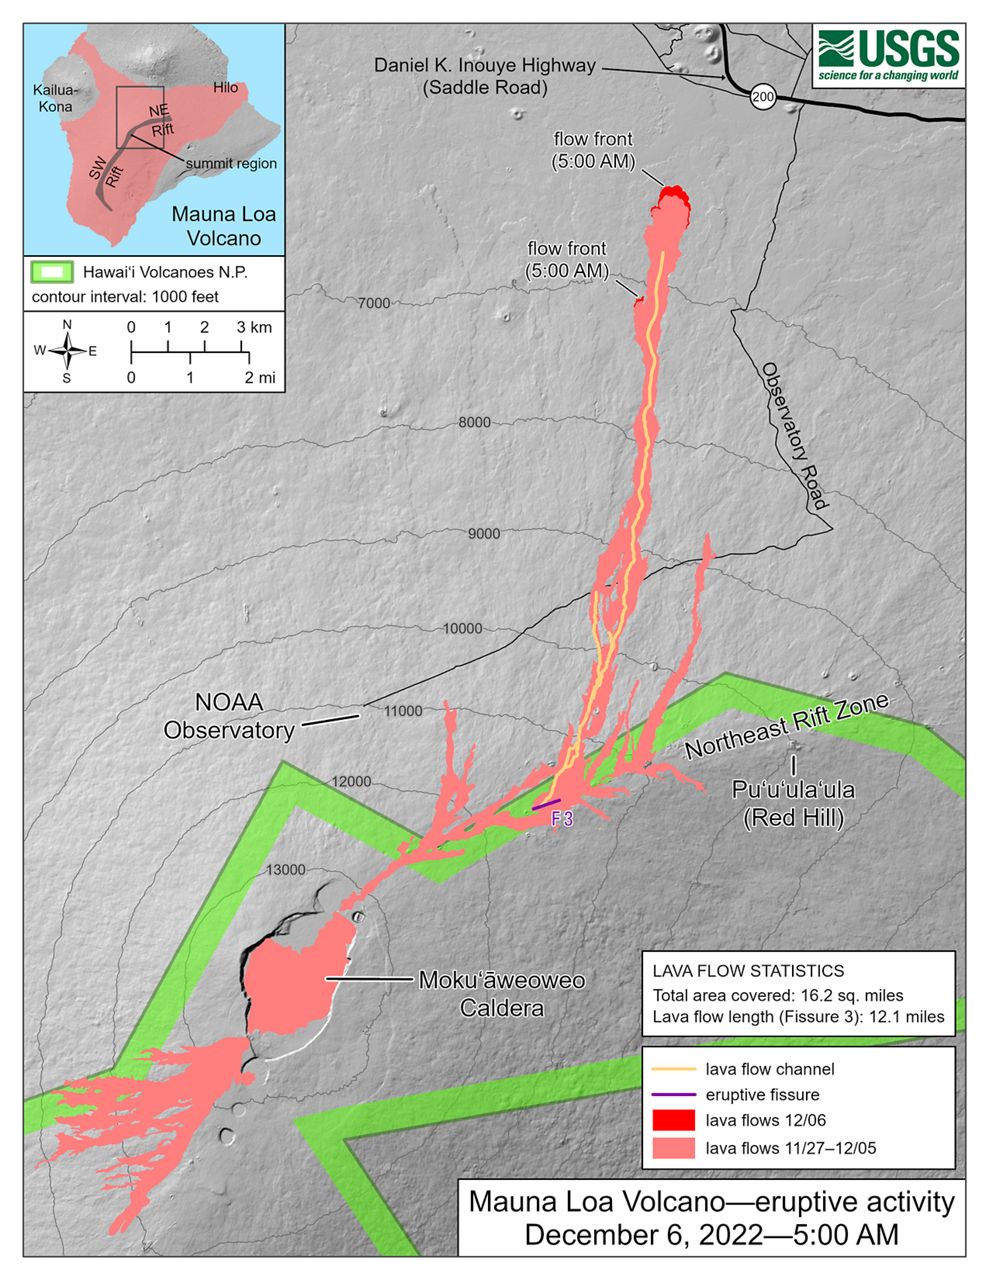 HVO field crews and USGS analysts have accurately mapped some of the most active flows, displayed in red here, along with older flows further uprift, in part of Mokuʻāweoweo Caldera, and in the upper summit region southwest of the caldera. (Map courtesy of USGS)